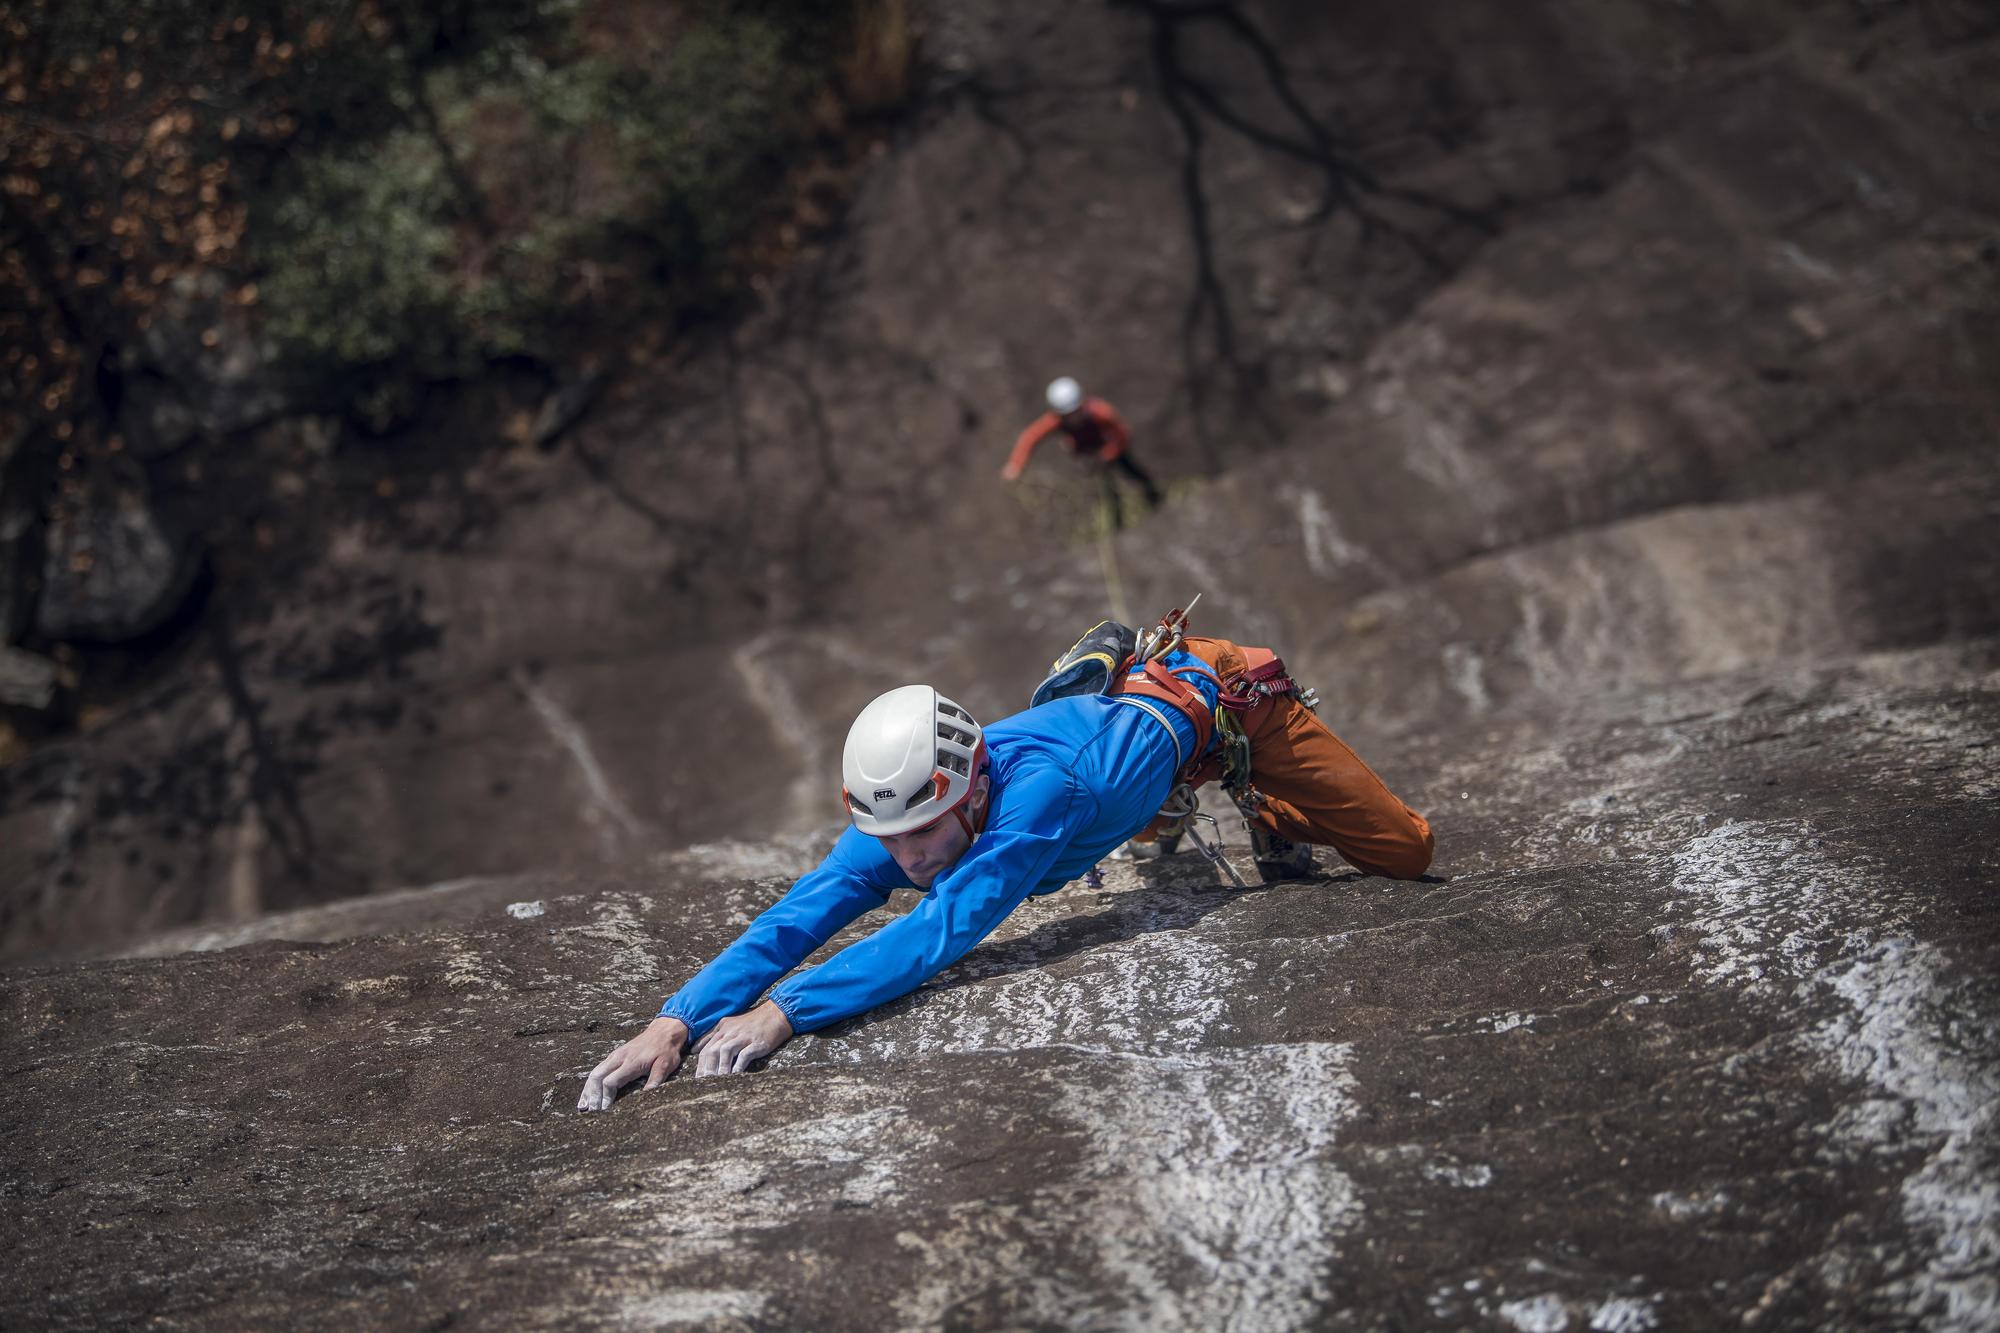 Trad Climbing photos from Linville Gorge by Bryan Miller